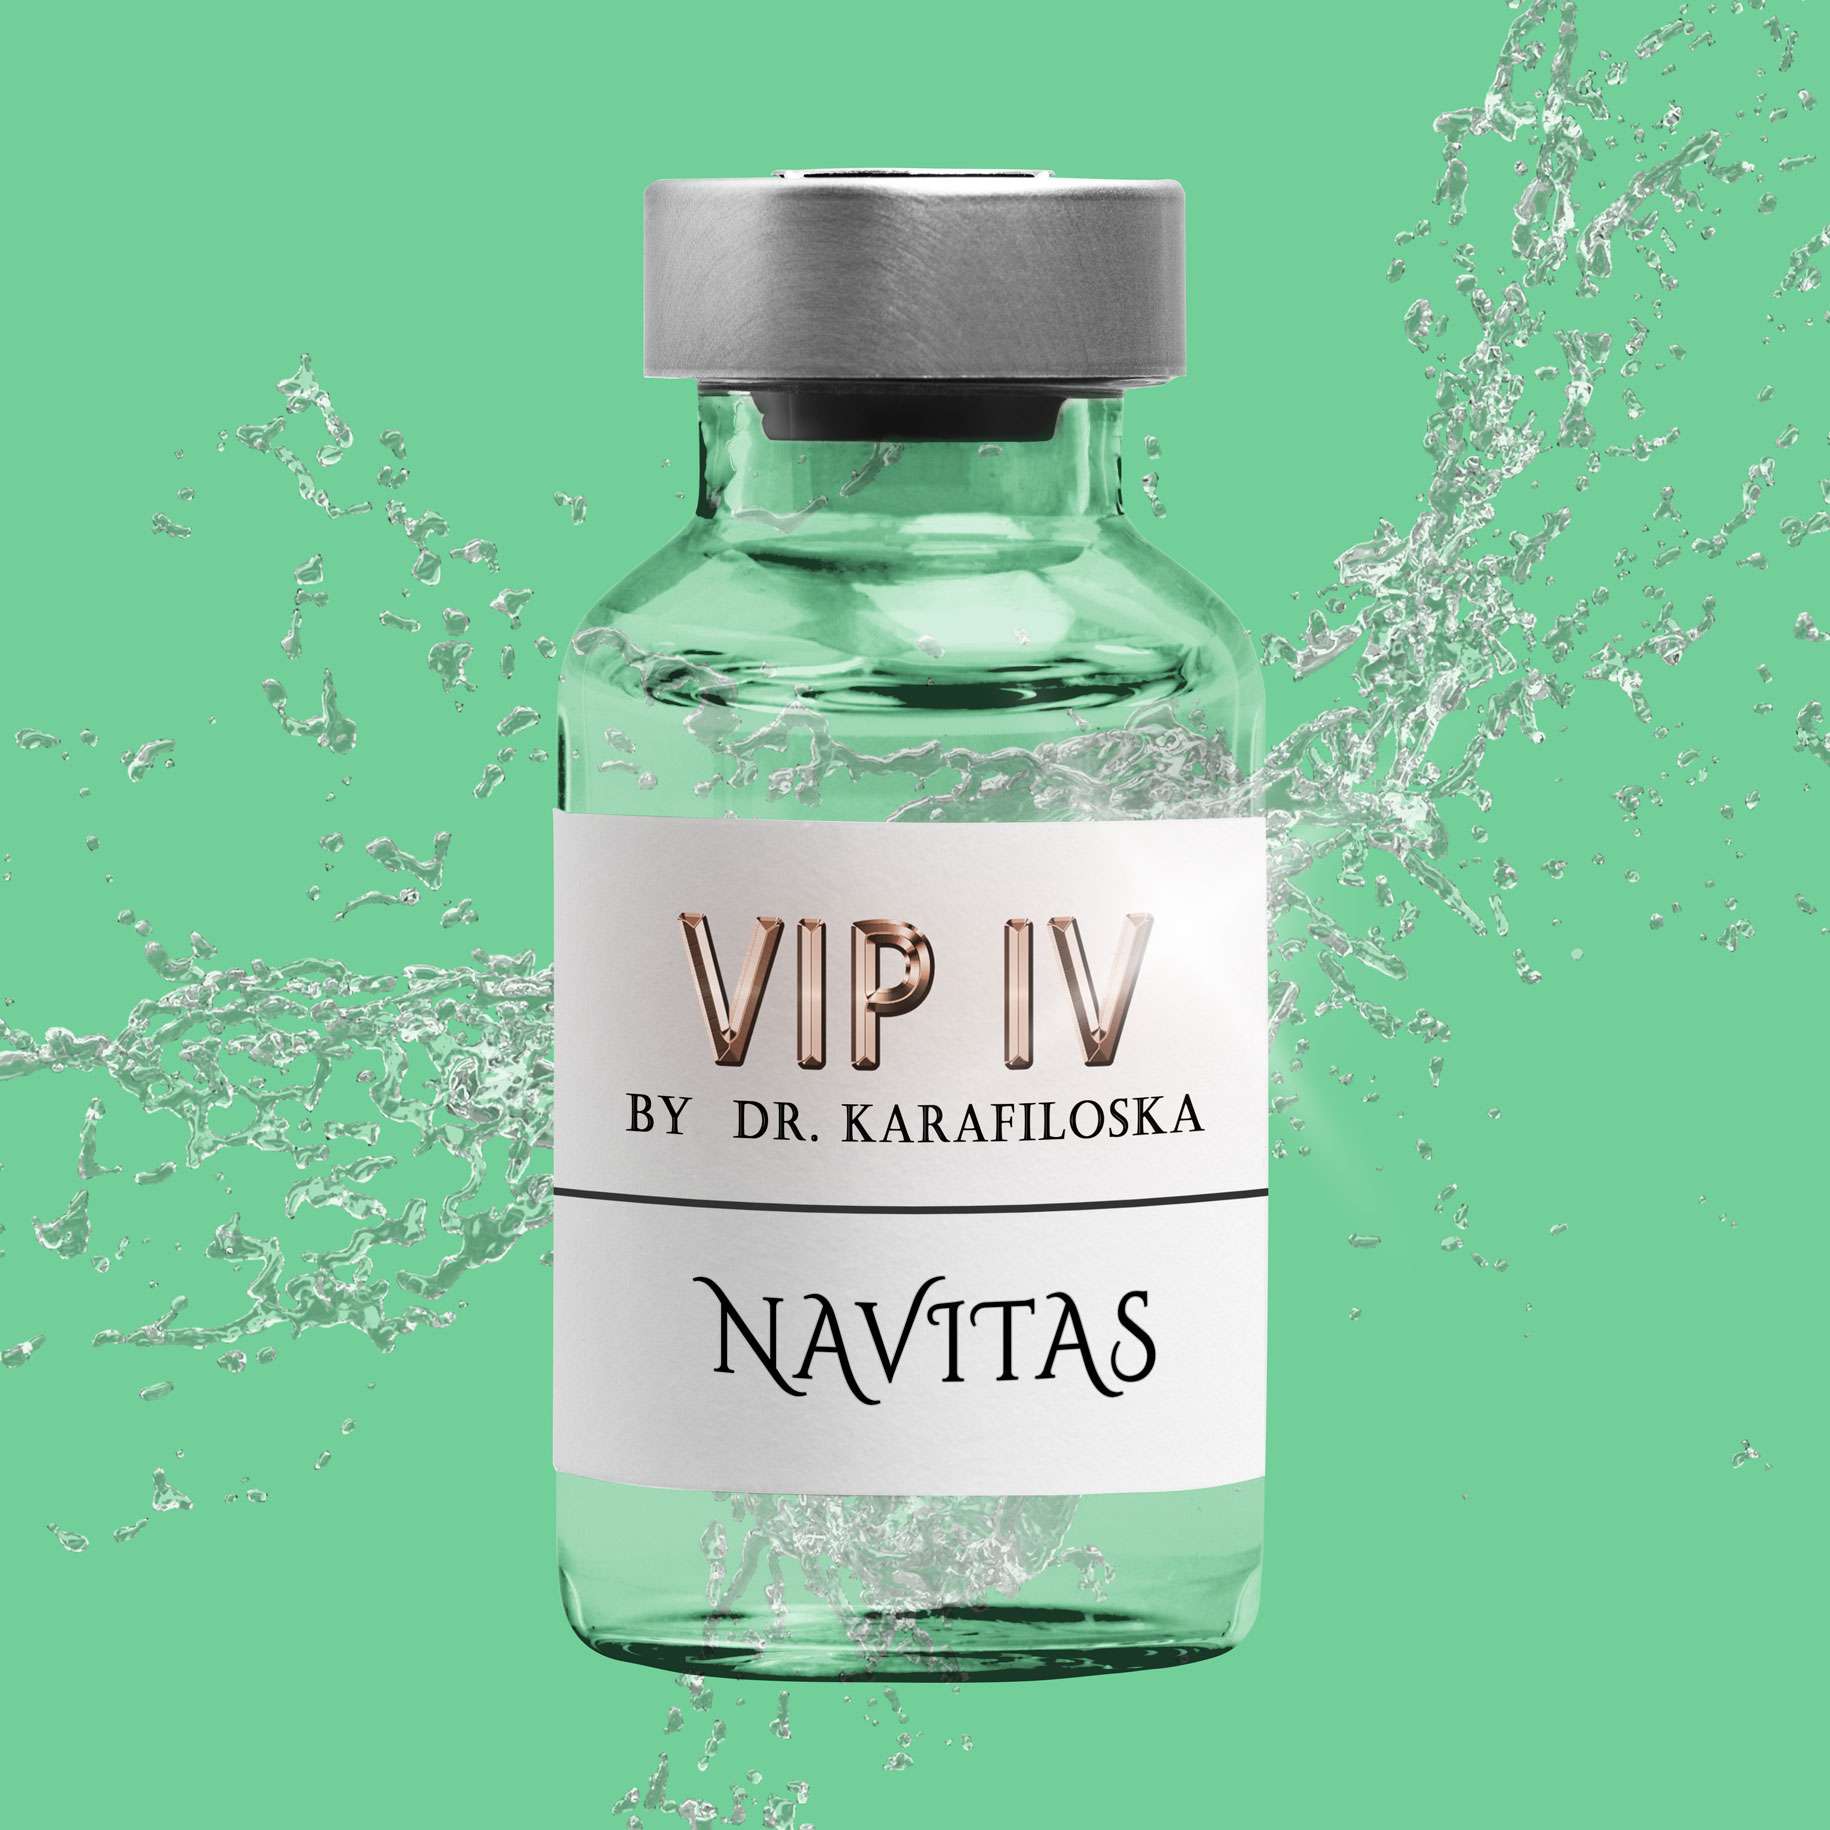 Infusions - picture of Navitas bottle